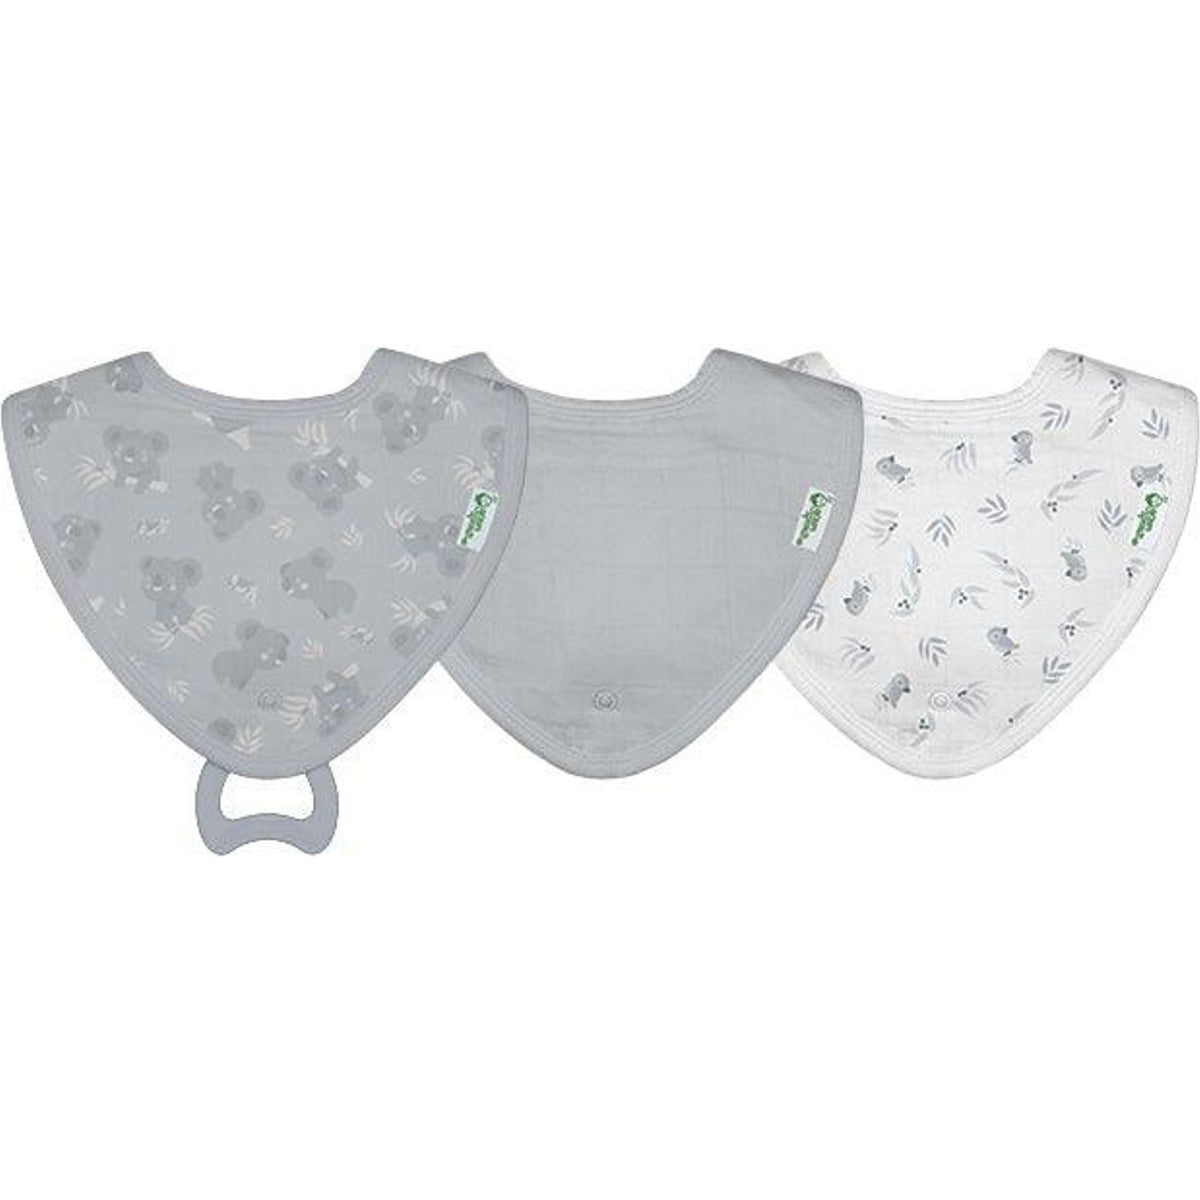 Muslin Stay-Dry Teether Bibs made from Organic Cotton (3 pack) - Toybox Tales